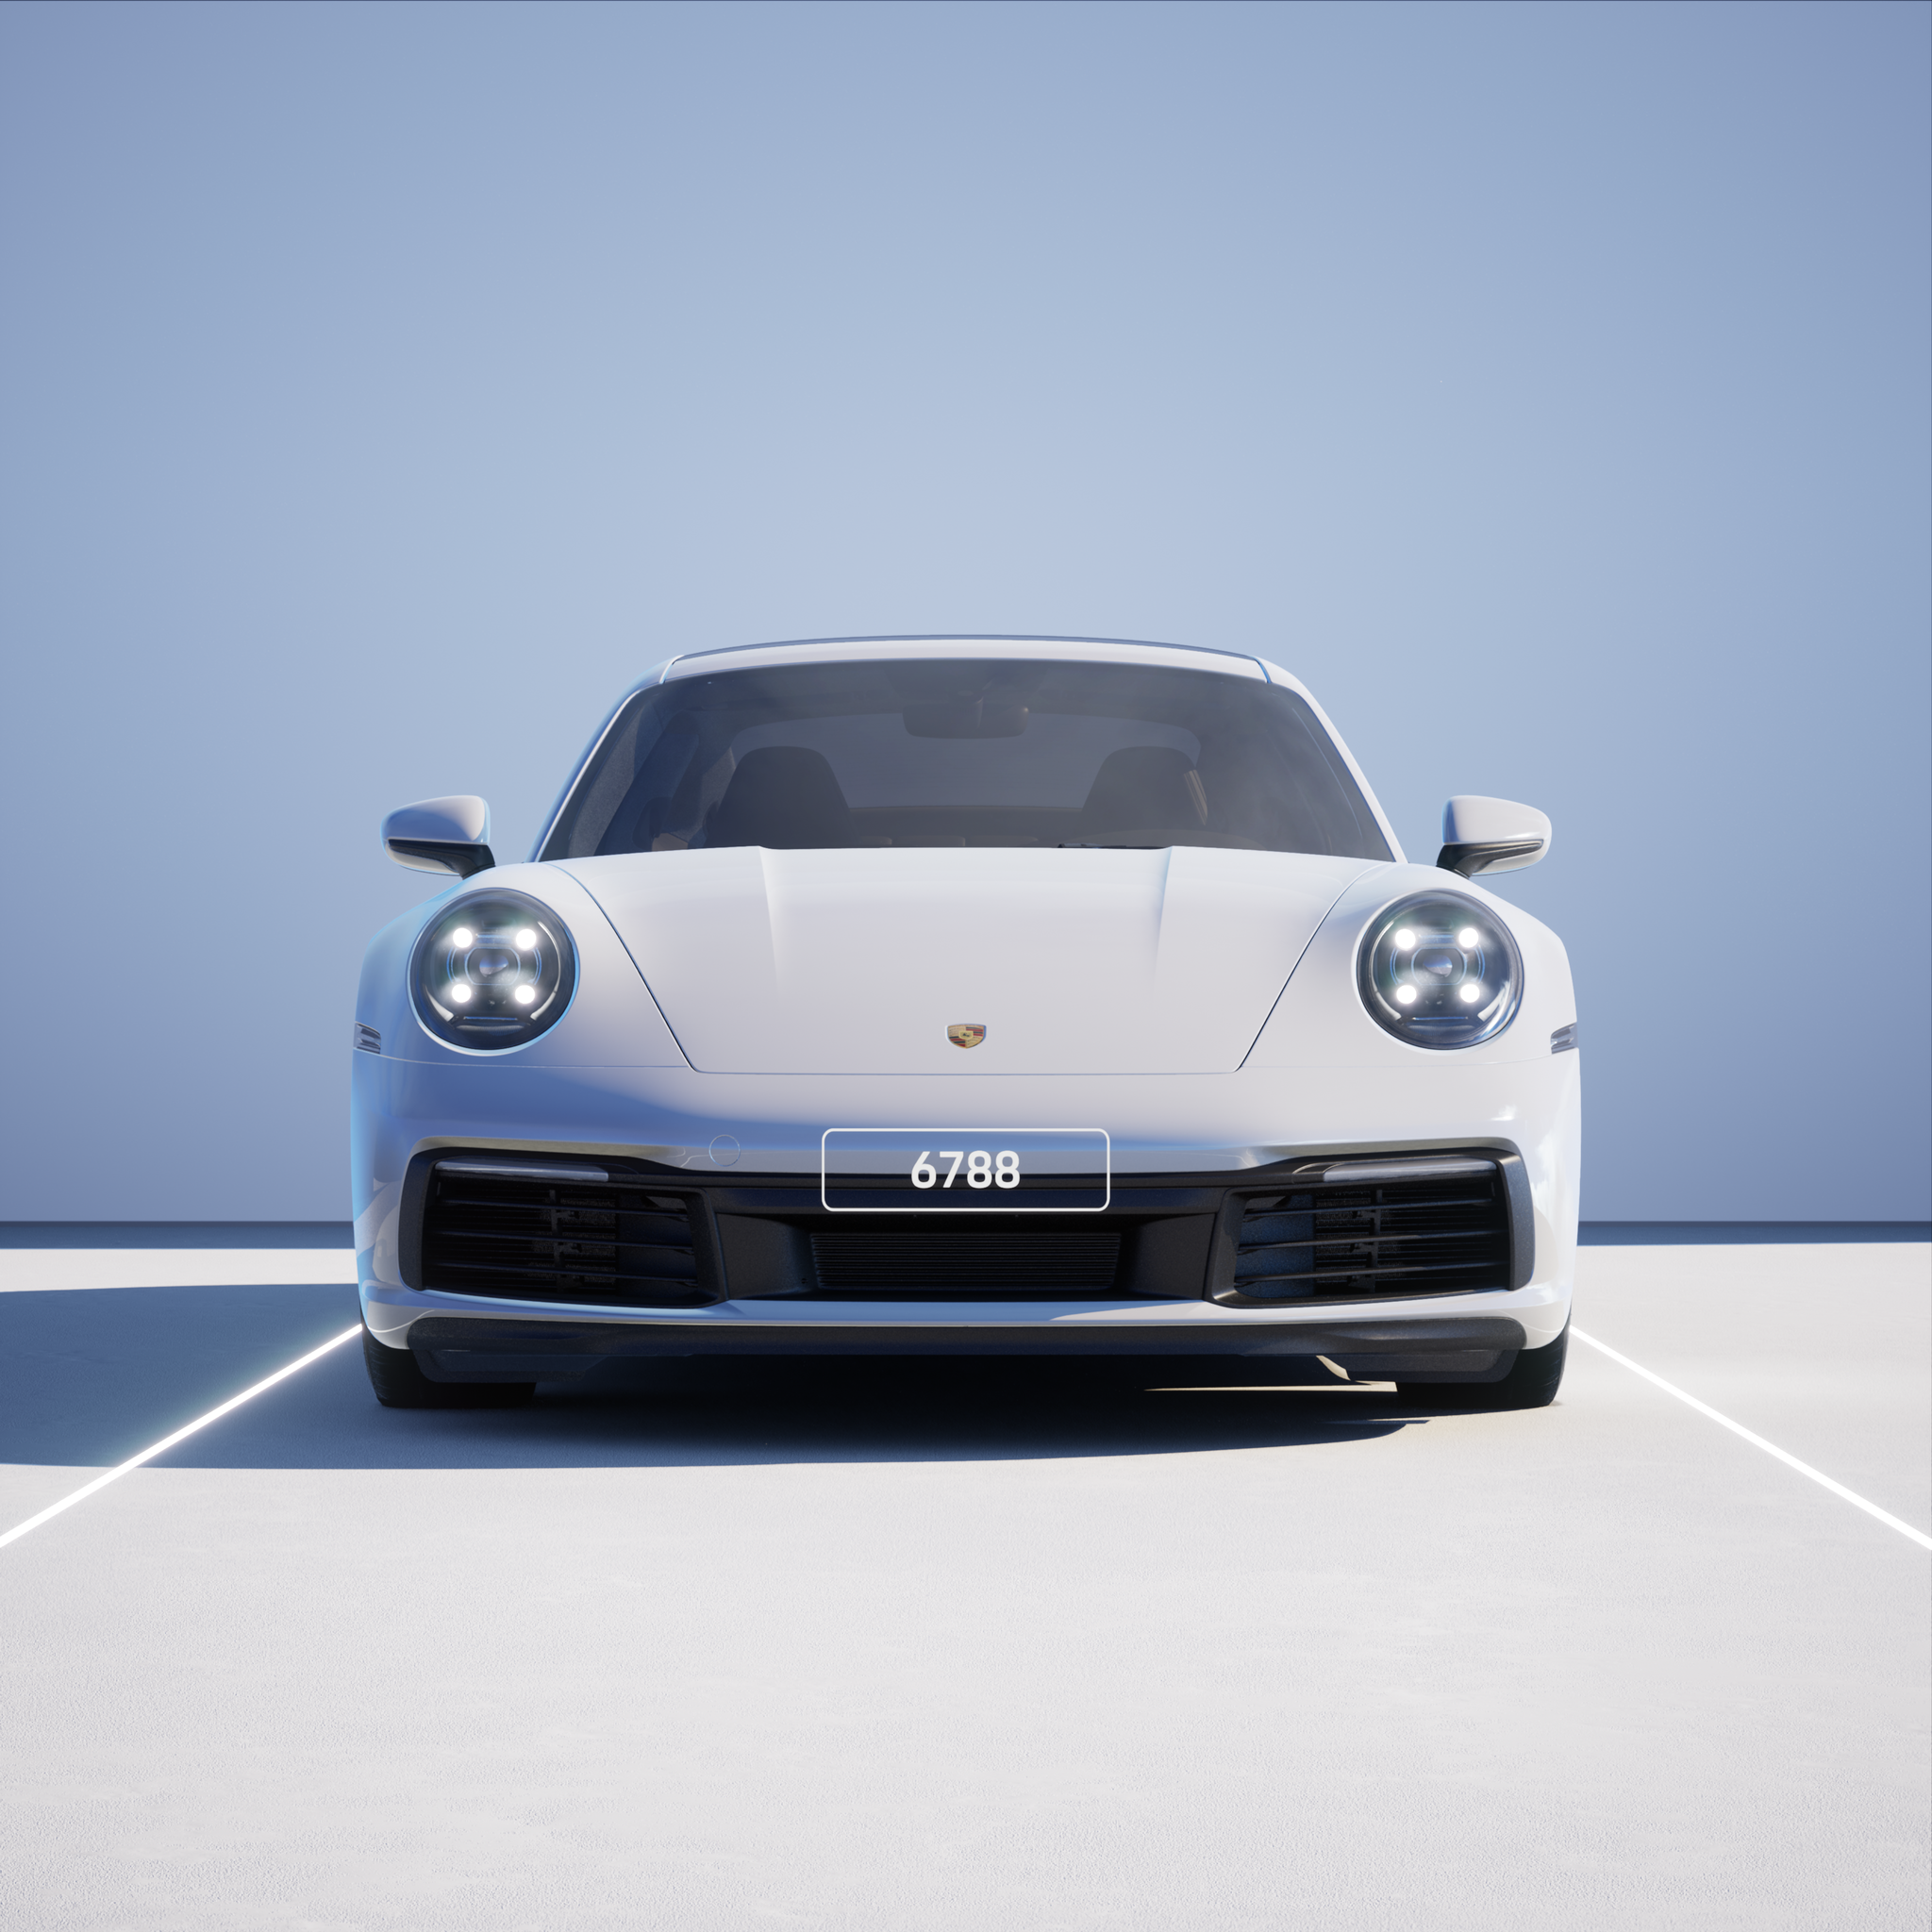 The PORSCHΞ 911 6788 image in phase